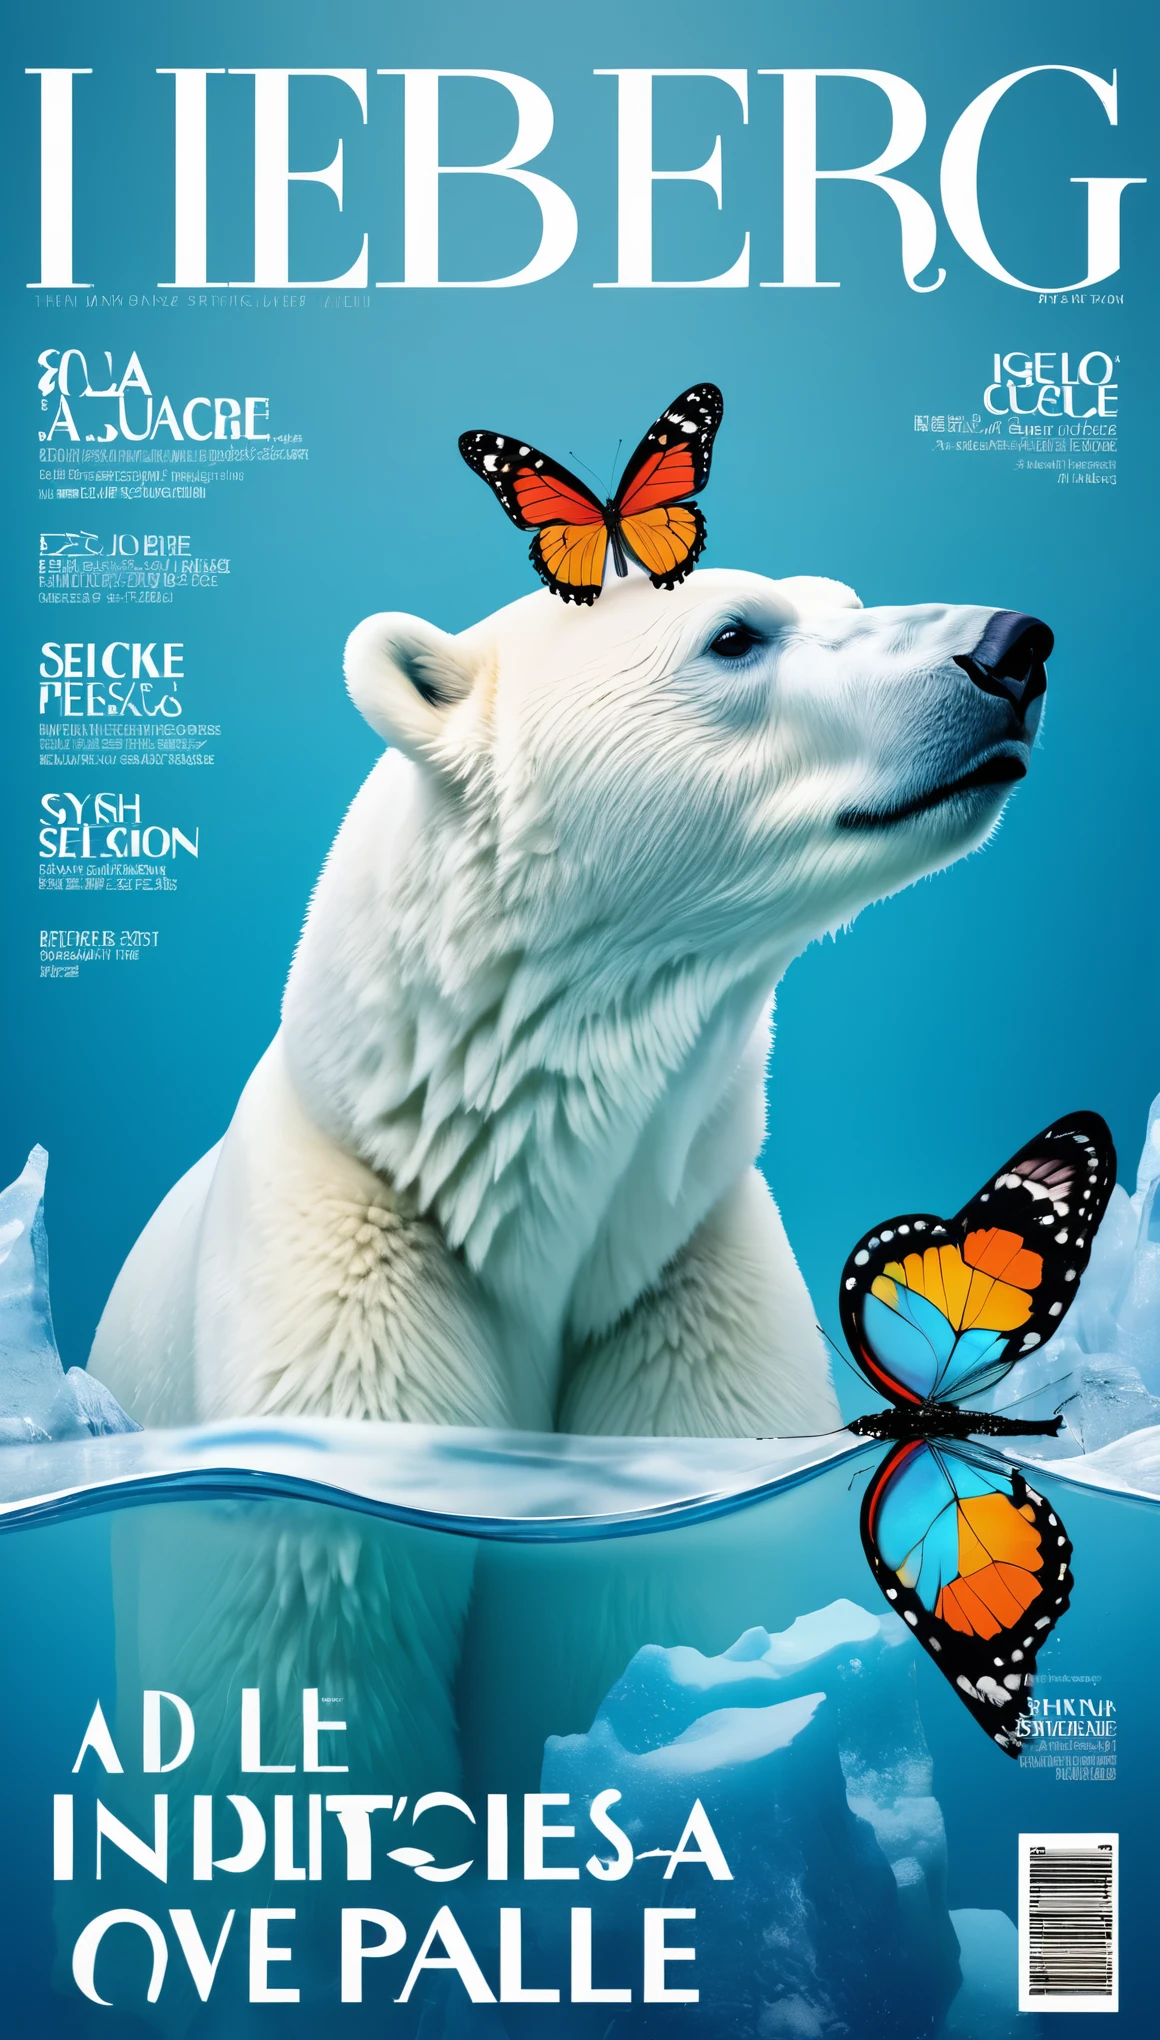 Fashion magazine cover design，Iceberg and polar bear，a colorful butterfly，text，barcode，Stylish and simple，The theme highlights caring for the environment